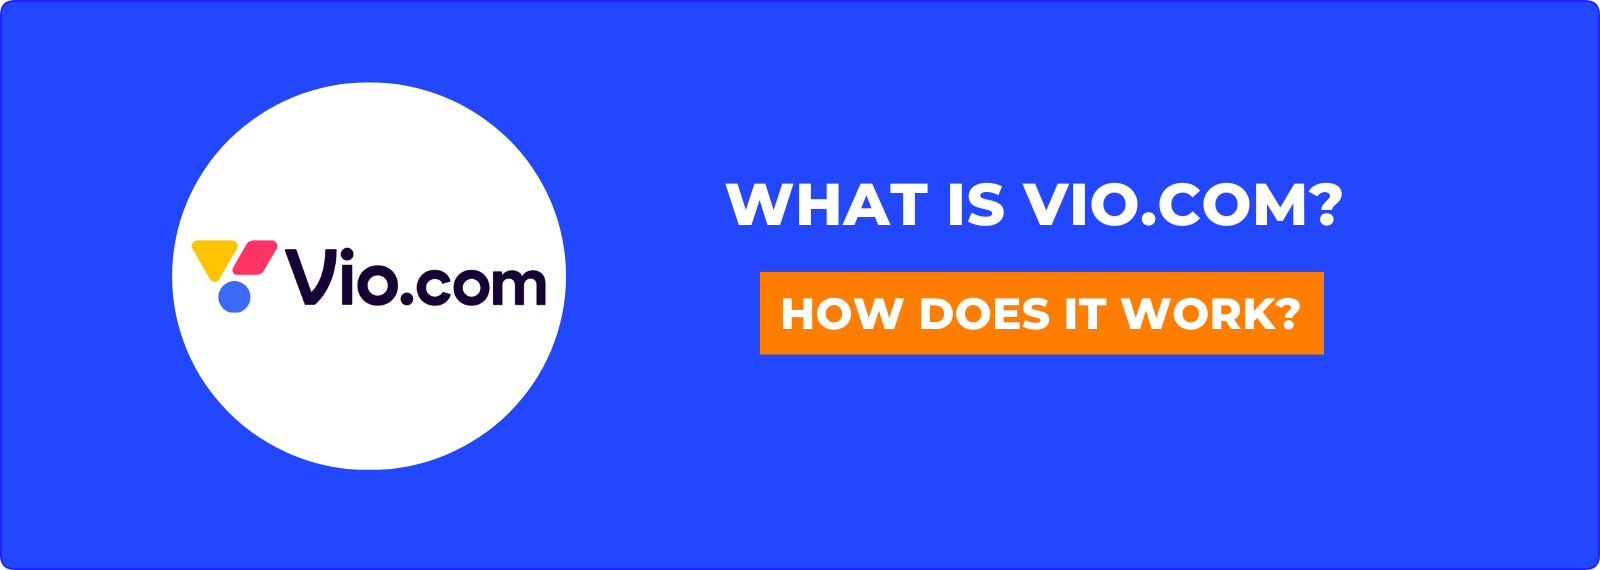 what is vio.com and how does it work